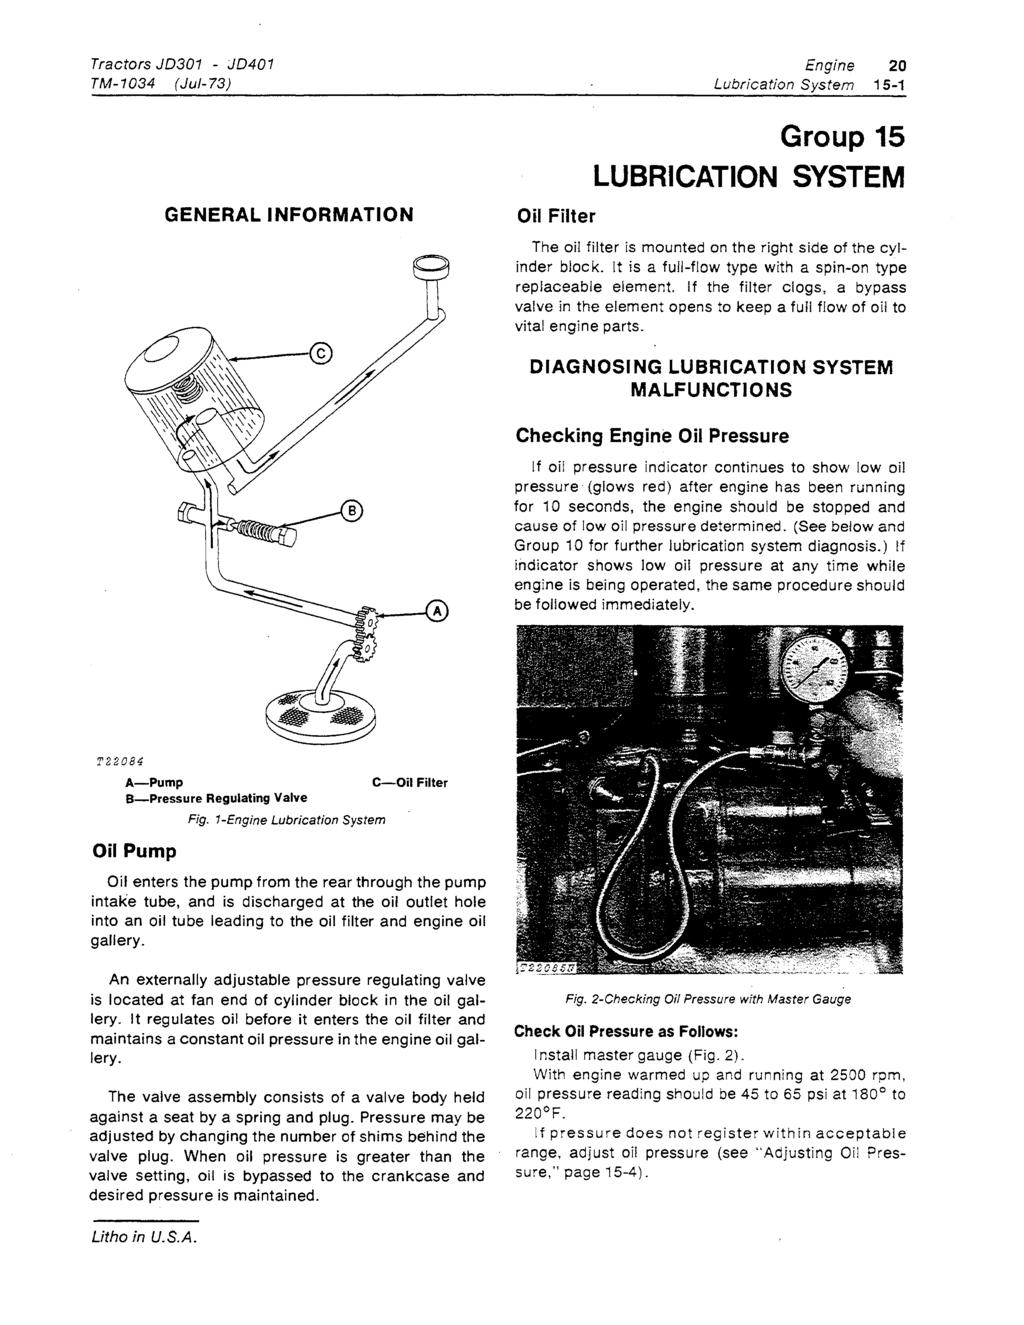 TM-1034 (Jul-73) GENERAL INFORMATION Oil Filter Engine 20 Lubrication System 15-1 Group 15 LUBRICATION SYSTEM The oil filter is mounted on the right side of the cylinder block.